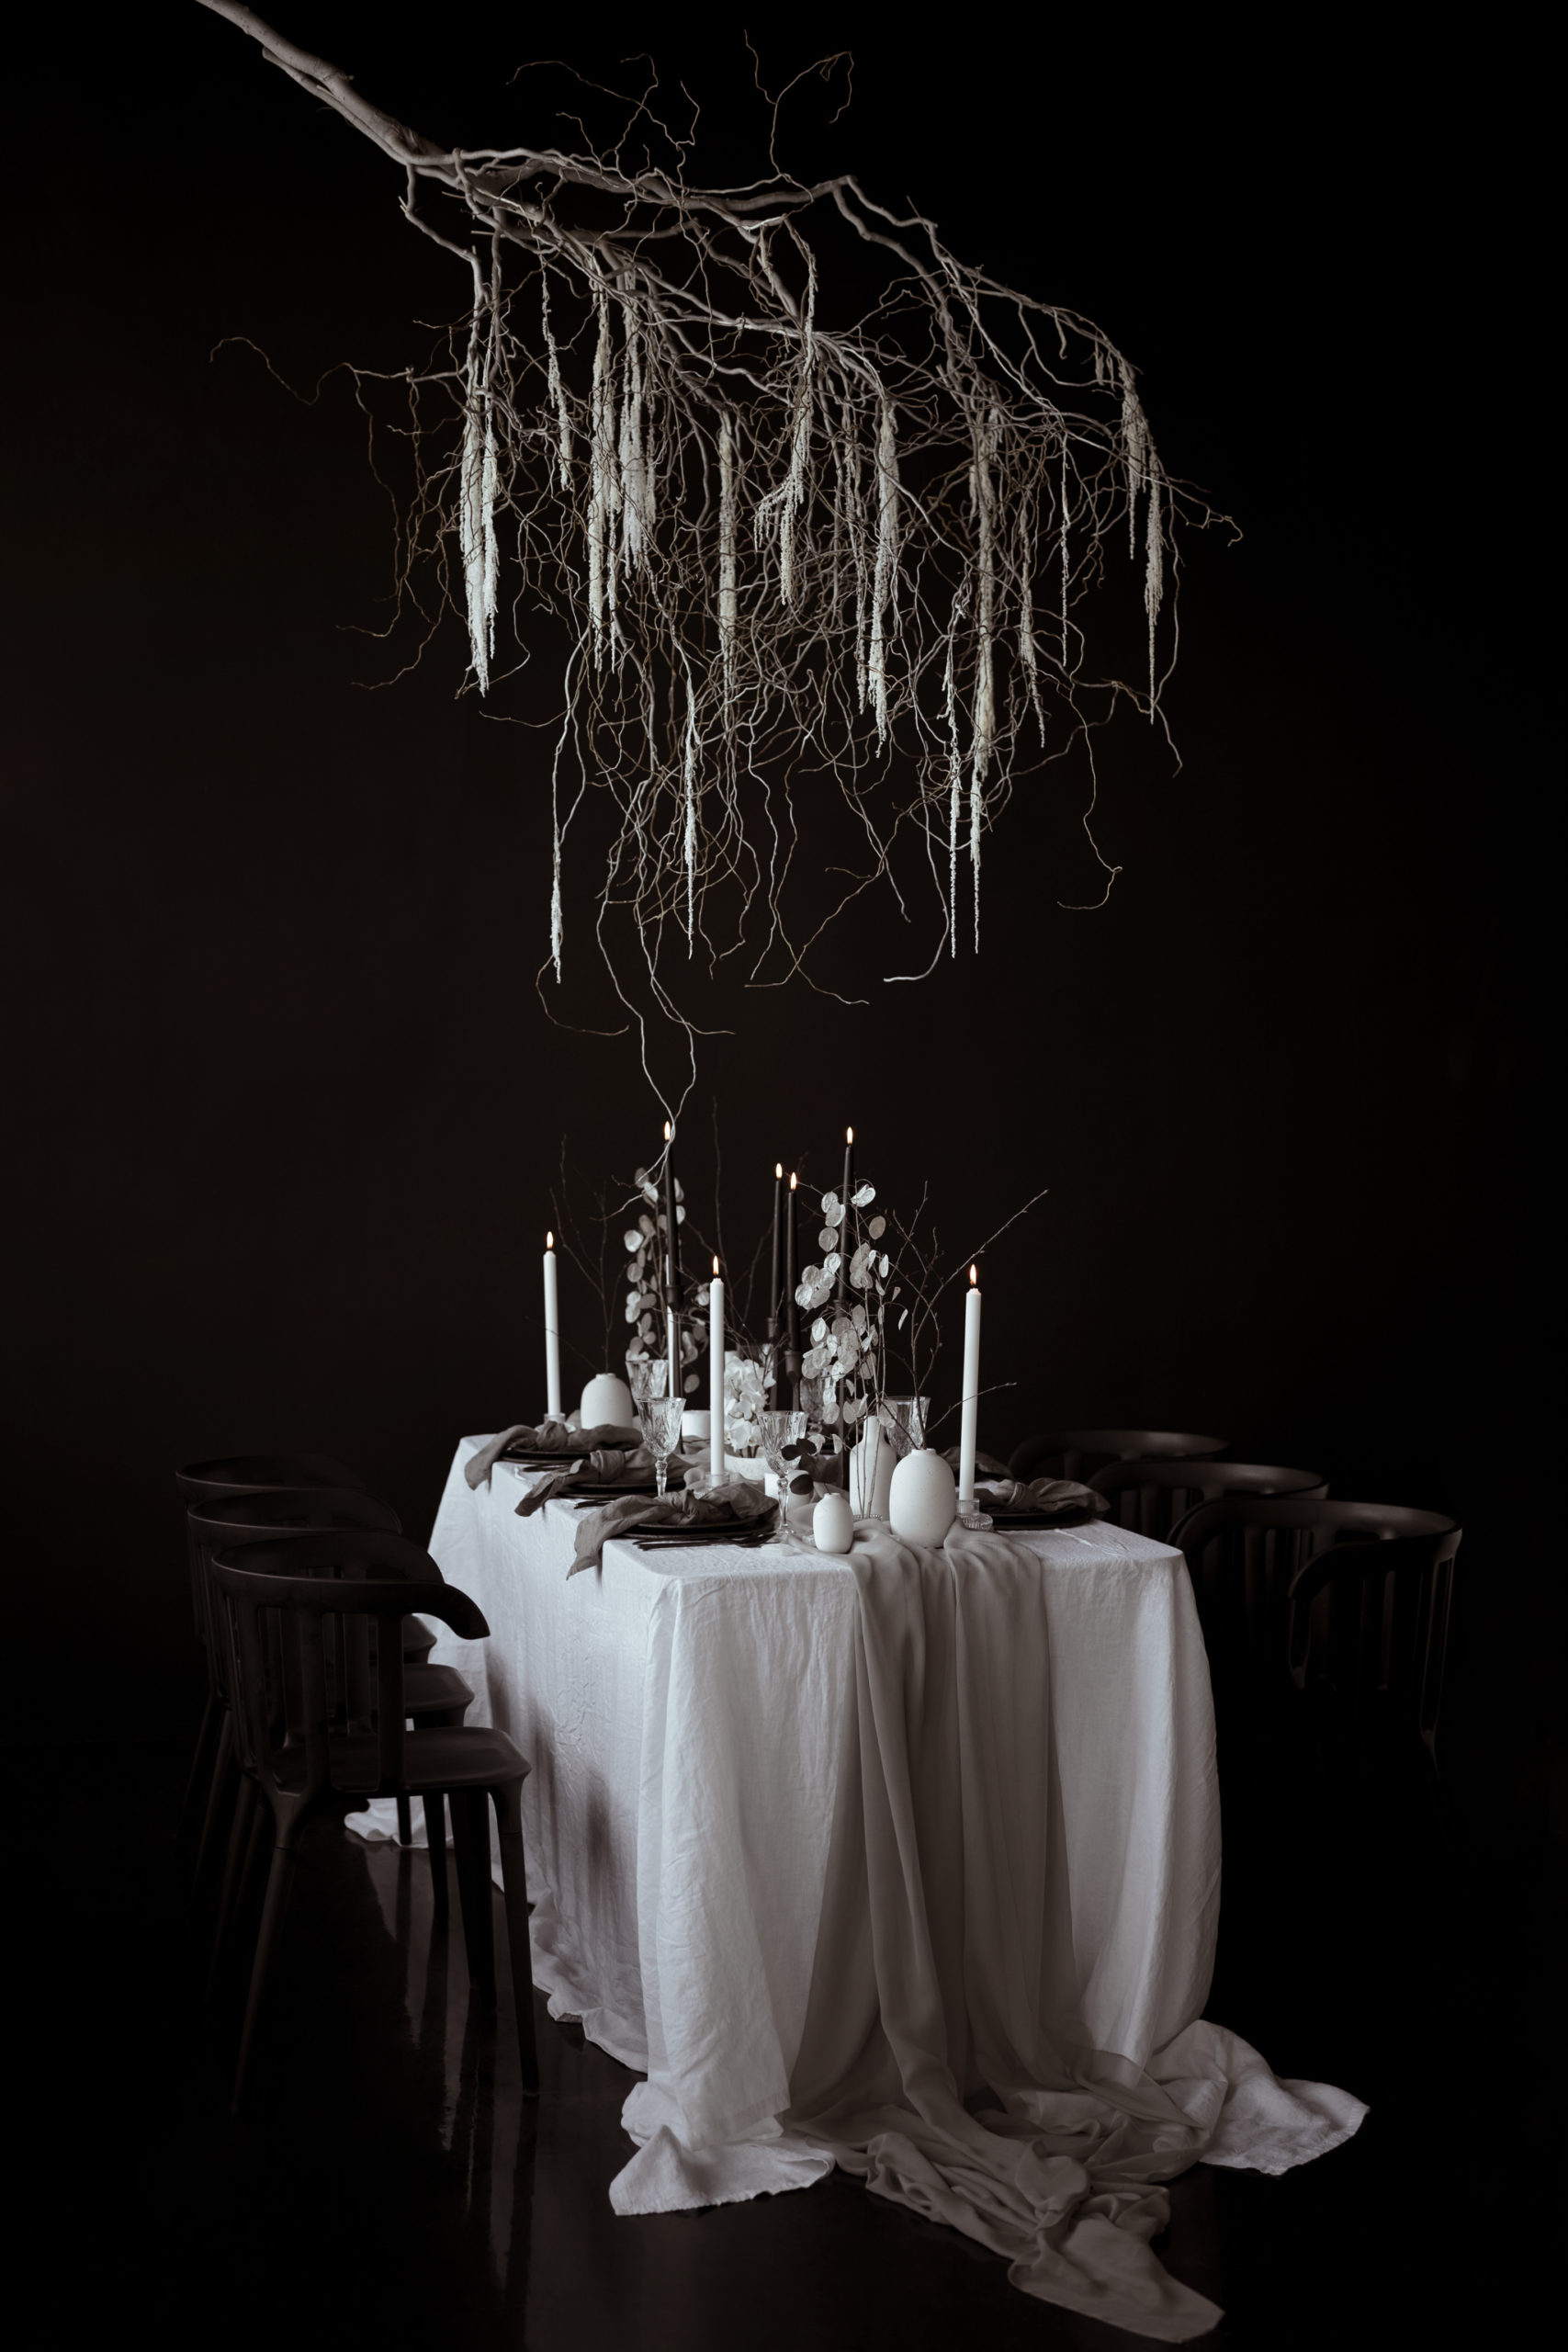 Black and white tablescape with handmade ceramics, candles and lunaria flowers.